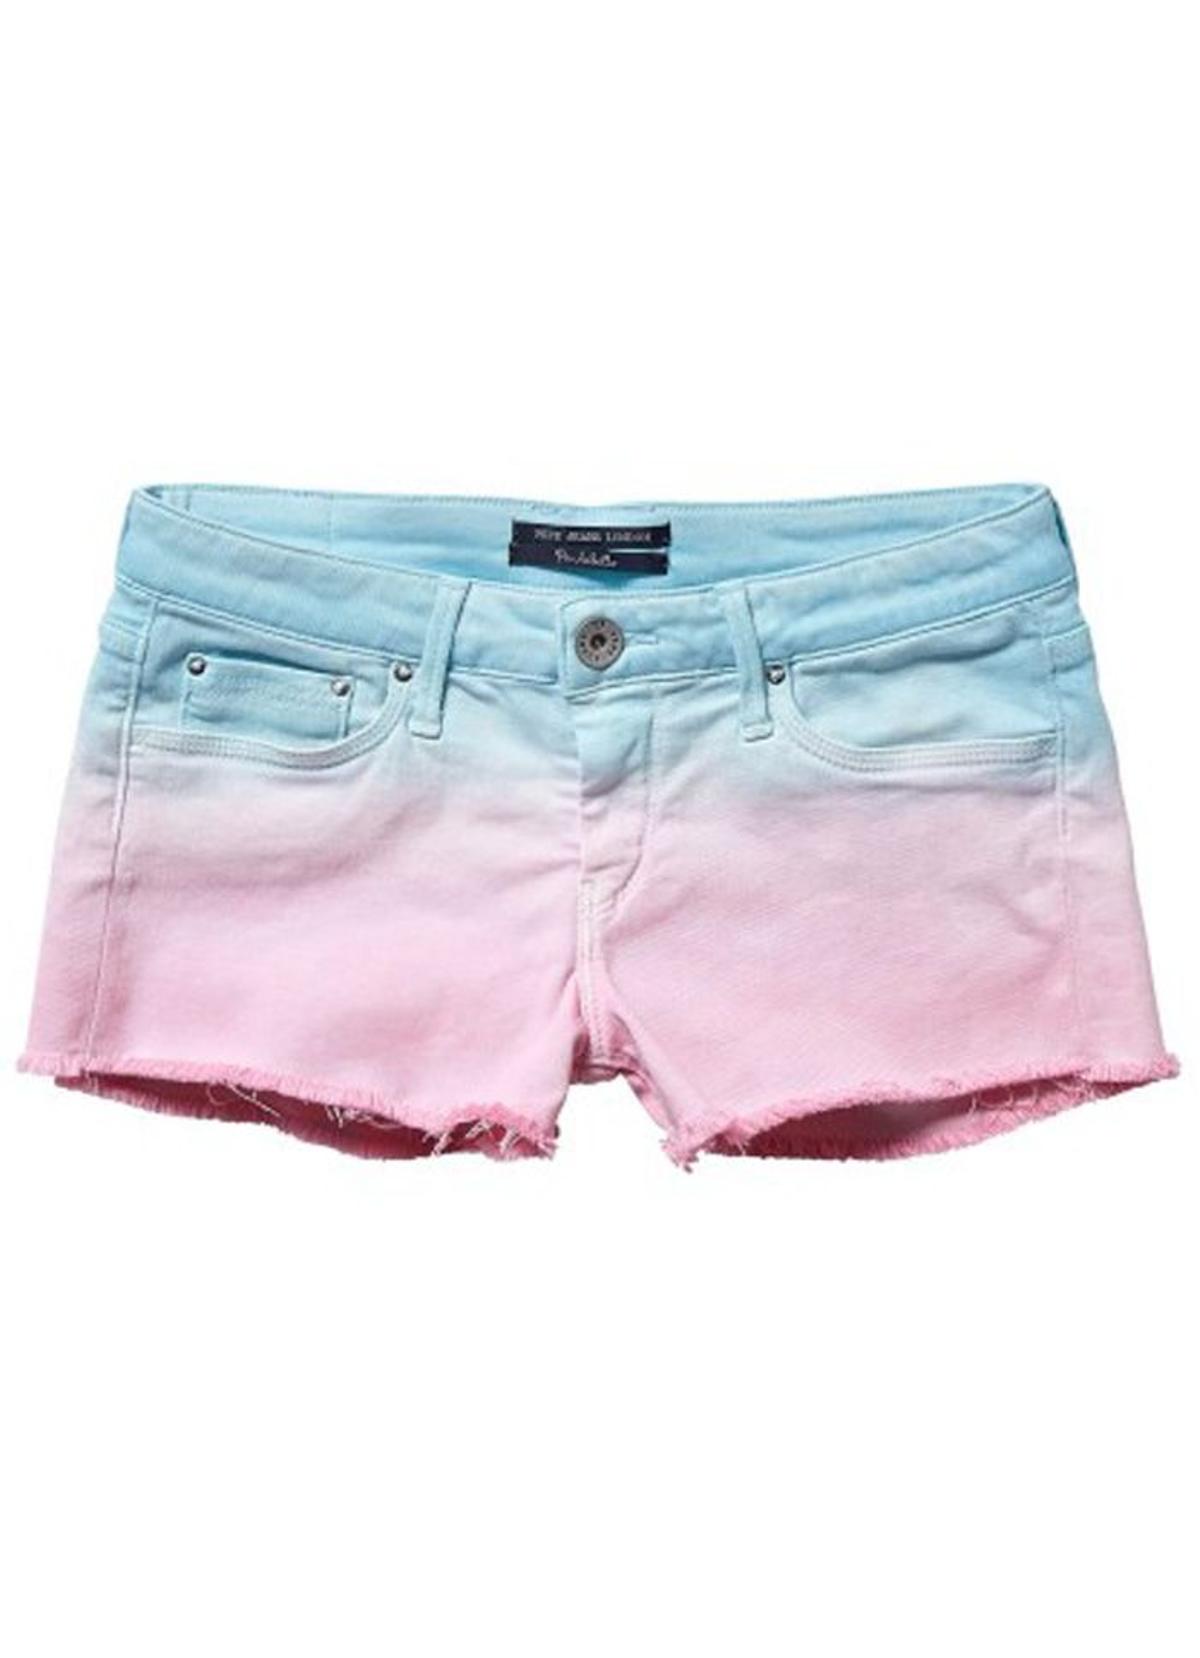 Shorts bicolor, Pepe Jeans